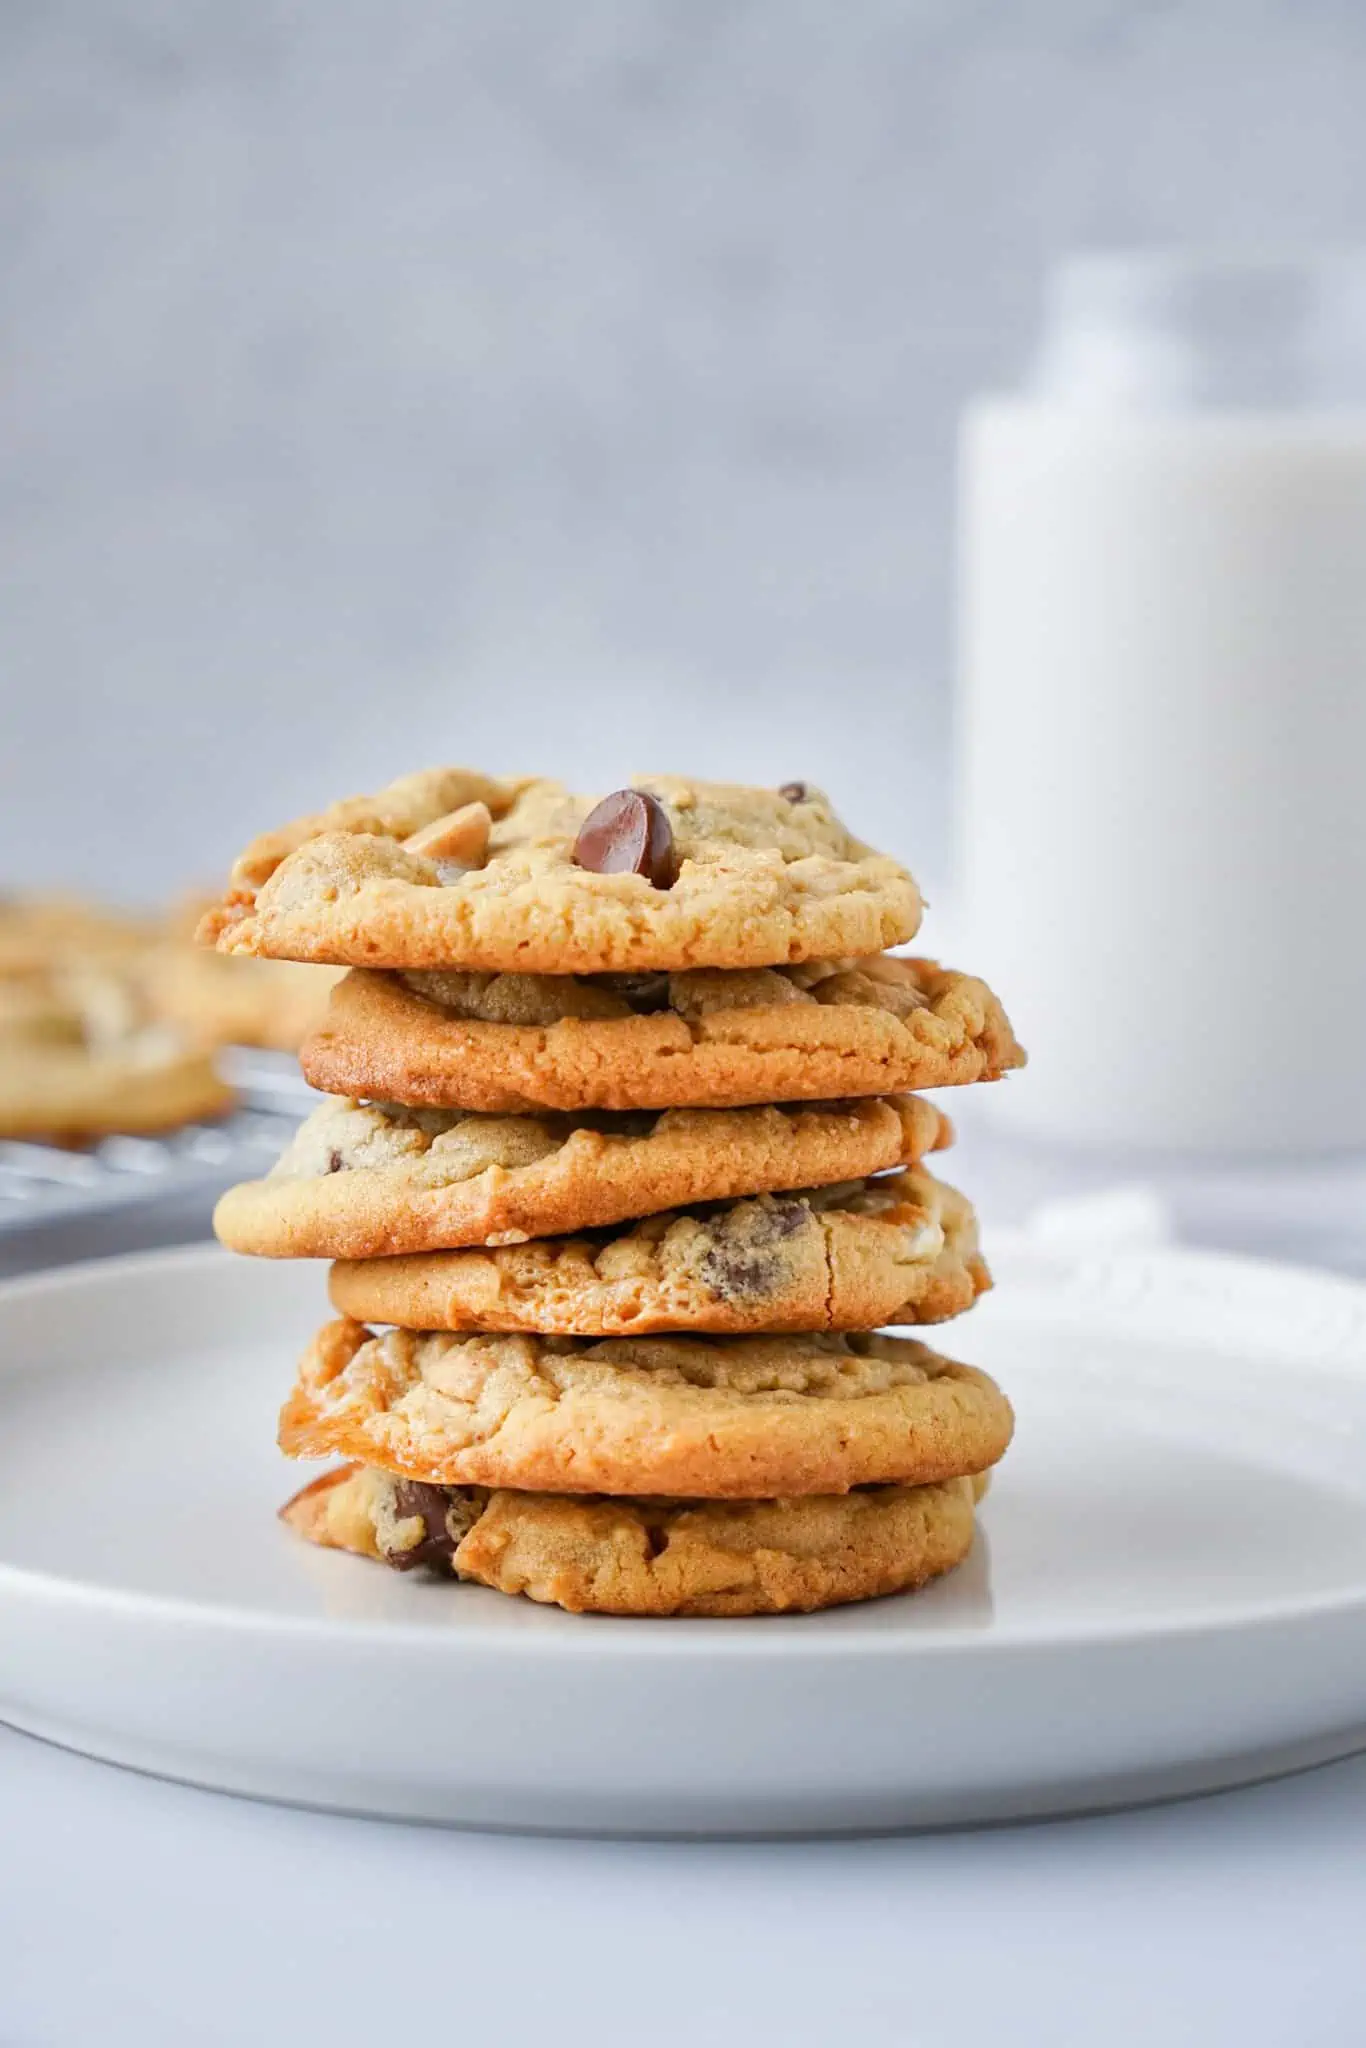 A stack of peanut butter chocolate chip cookies with a glass of milk.